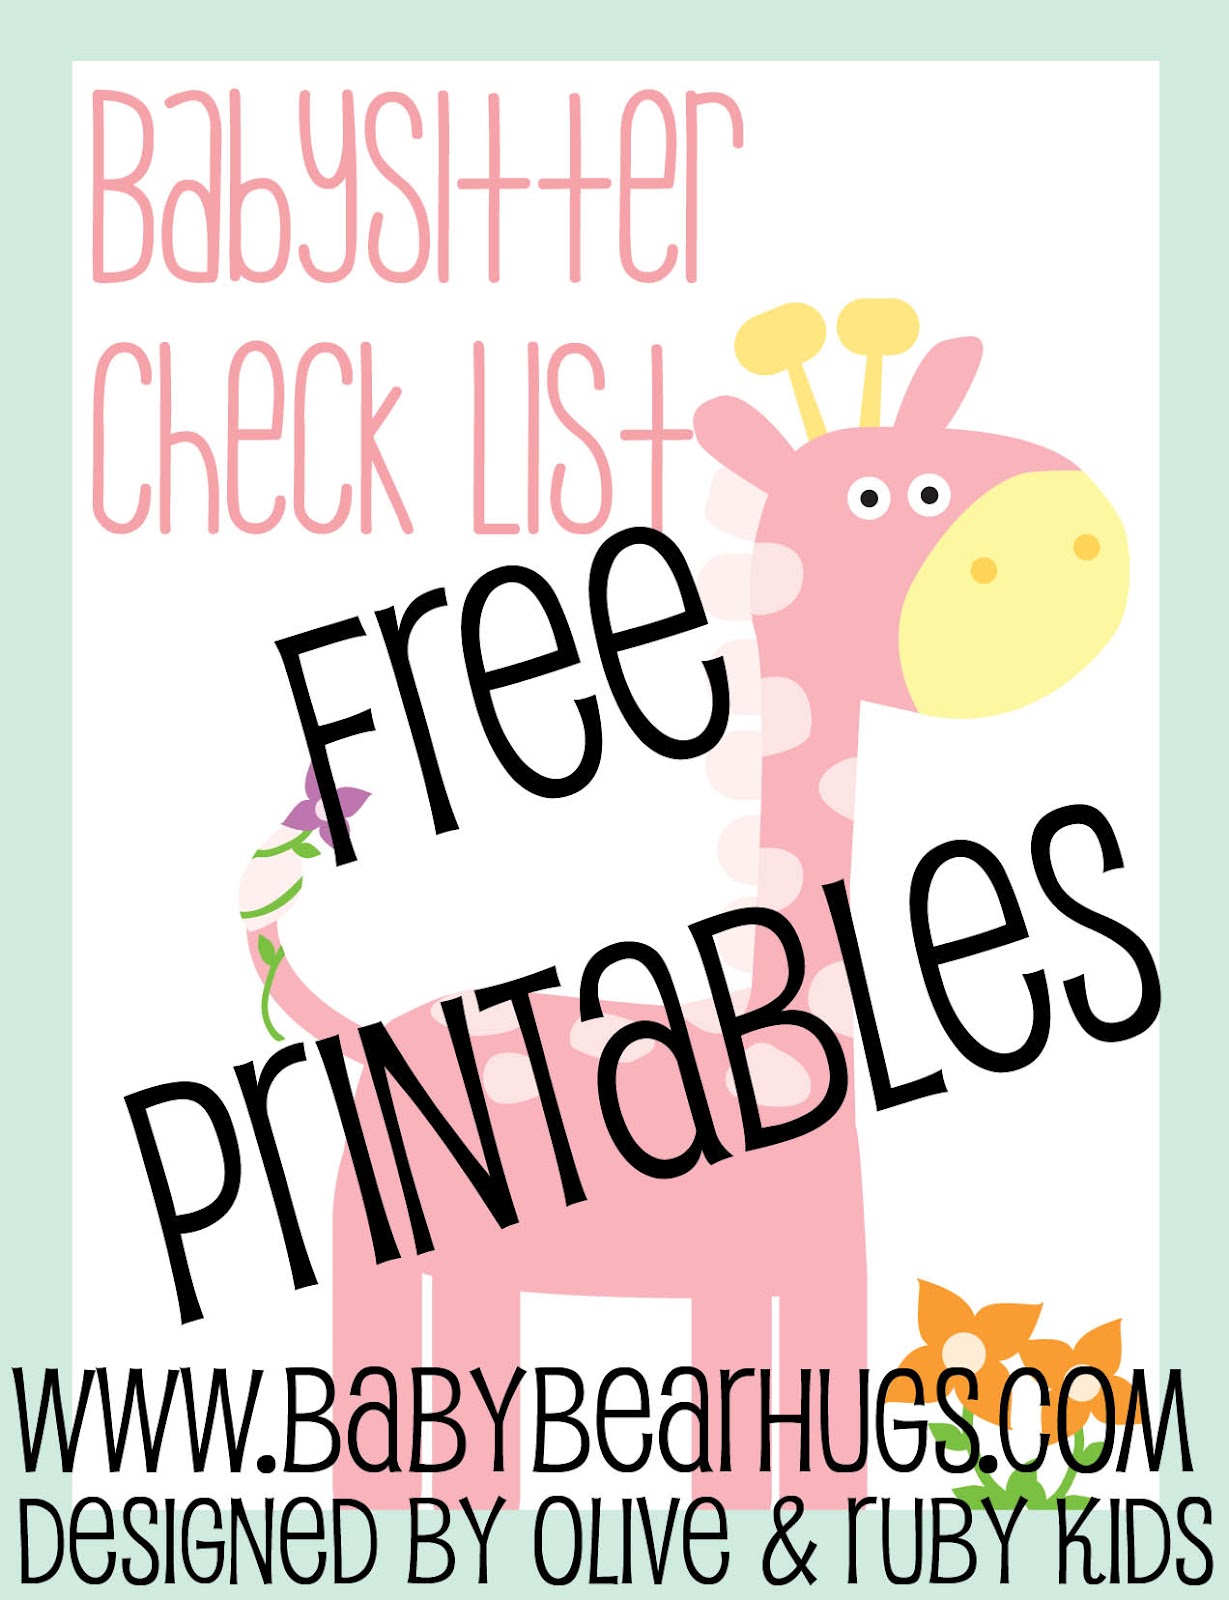 baby-bear-hugs-babysitter-checklist-free-printable-by-olive-ruby